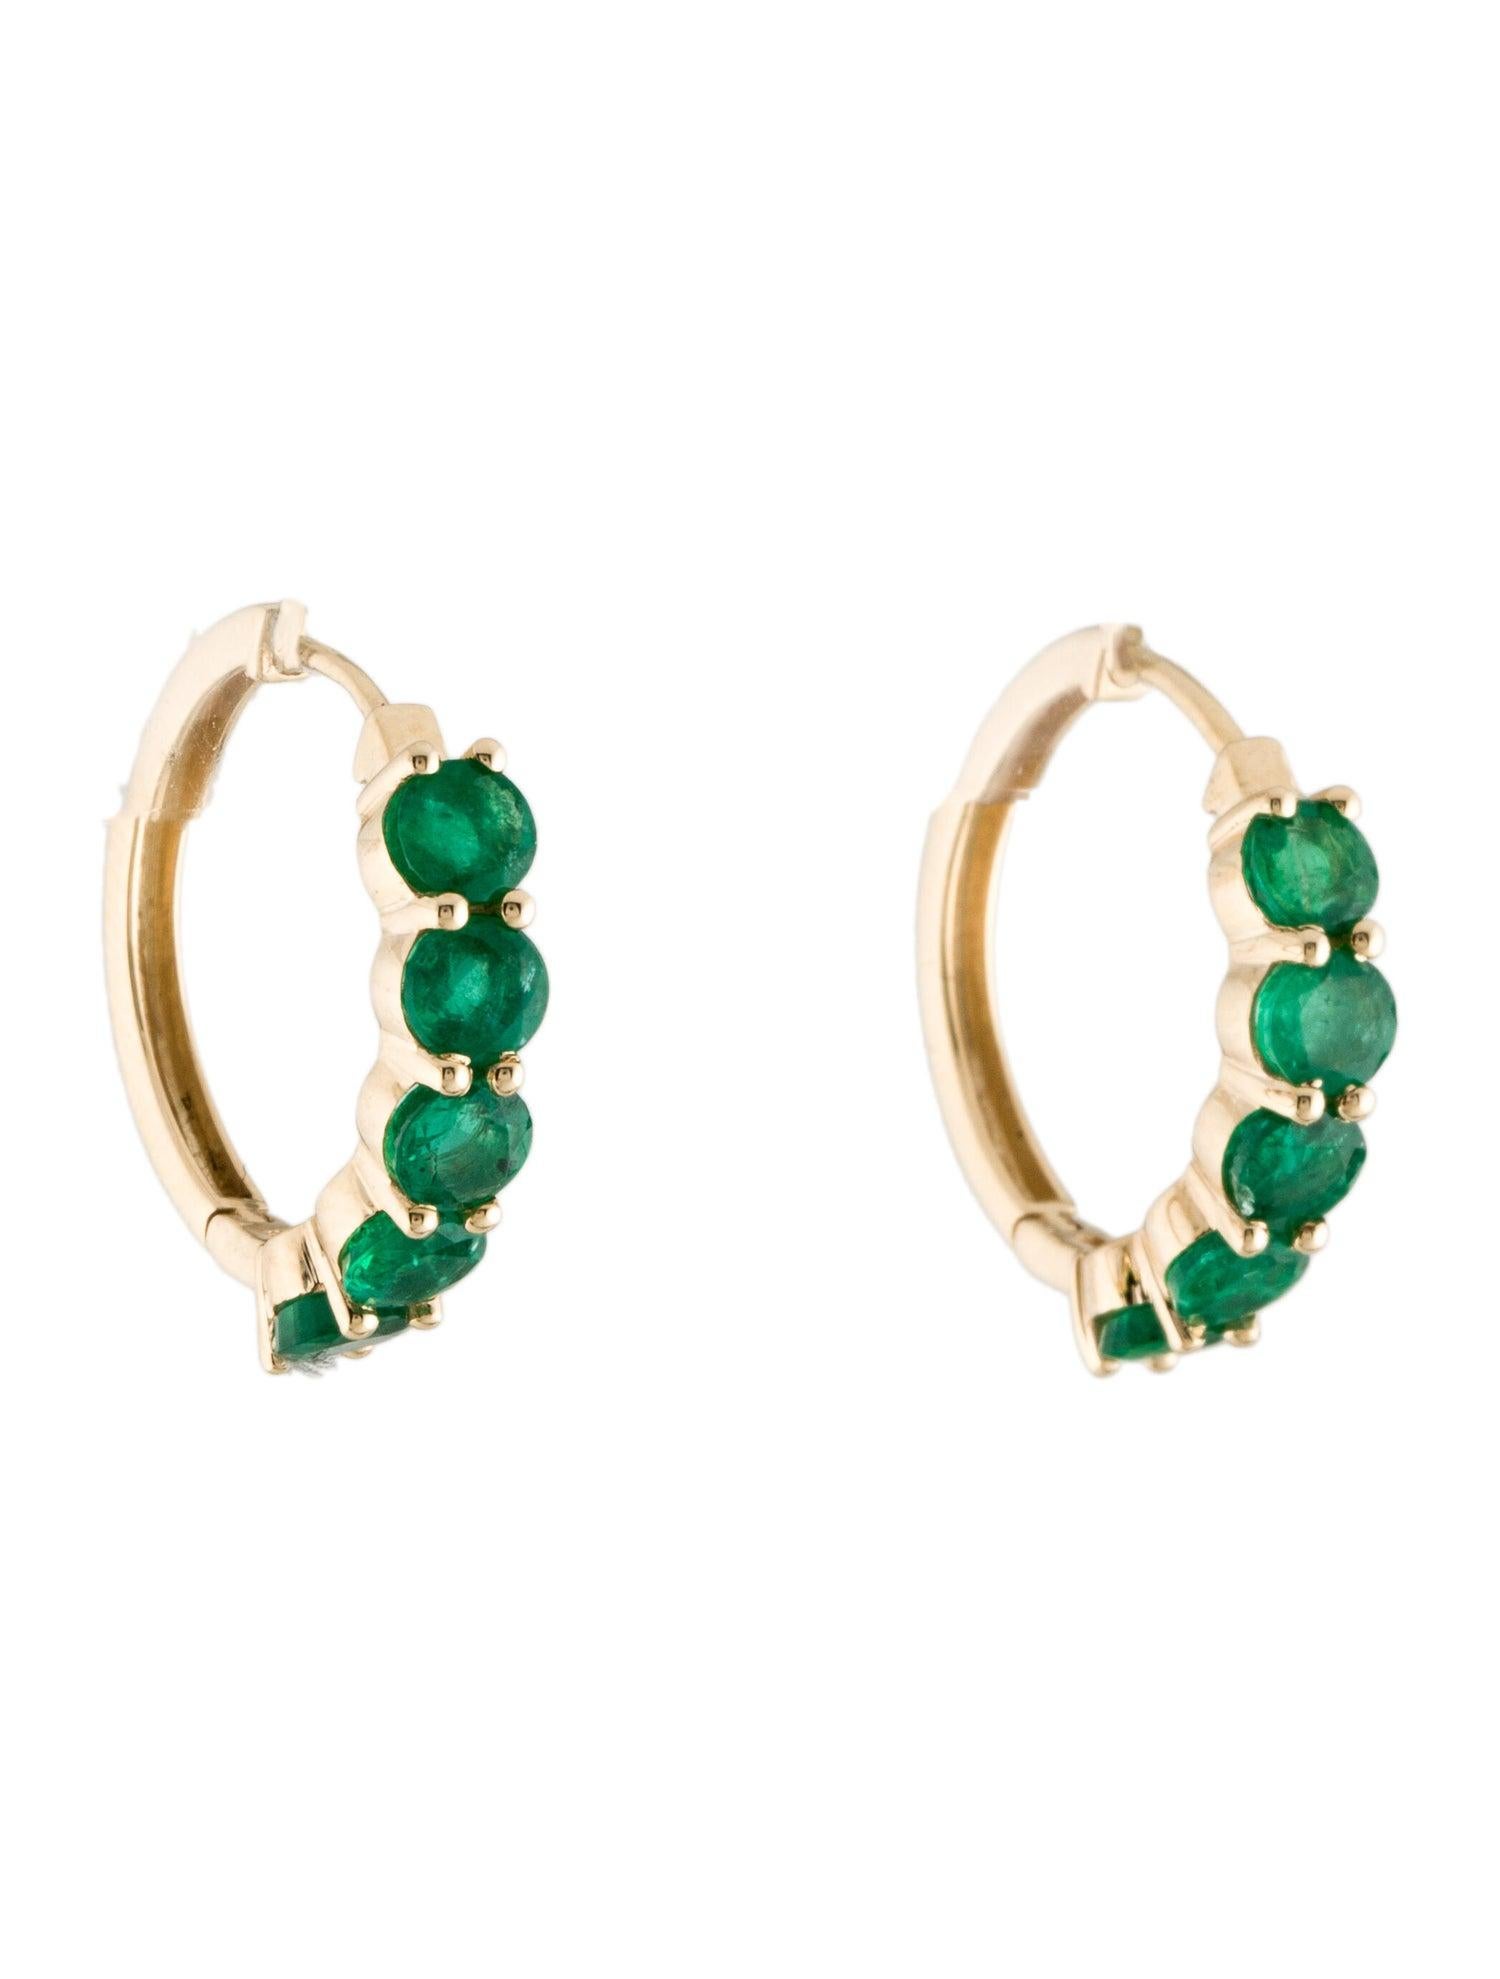 14K Emerald Hoop Earrings - 1.88ctw, Elegant Gemstone Jewelry, Classic Style In New Condition For Sale In Holtsville, NY